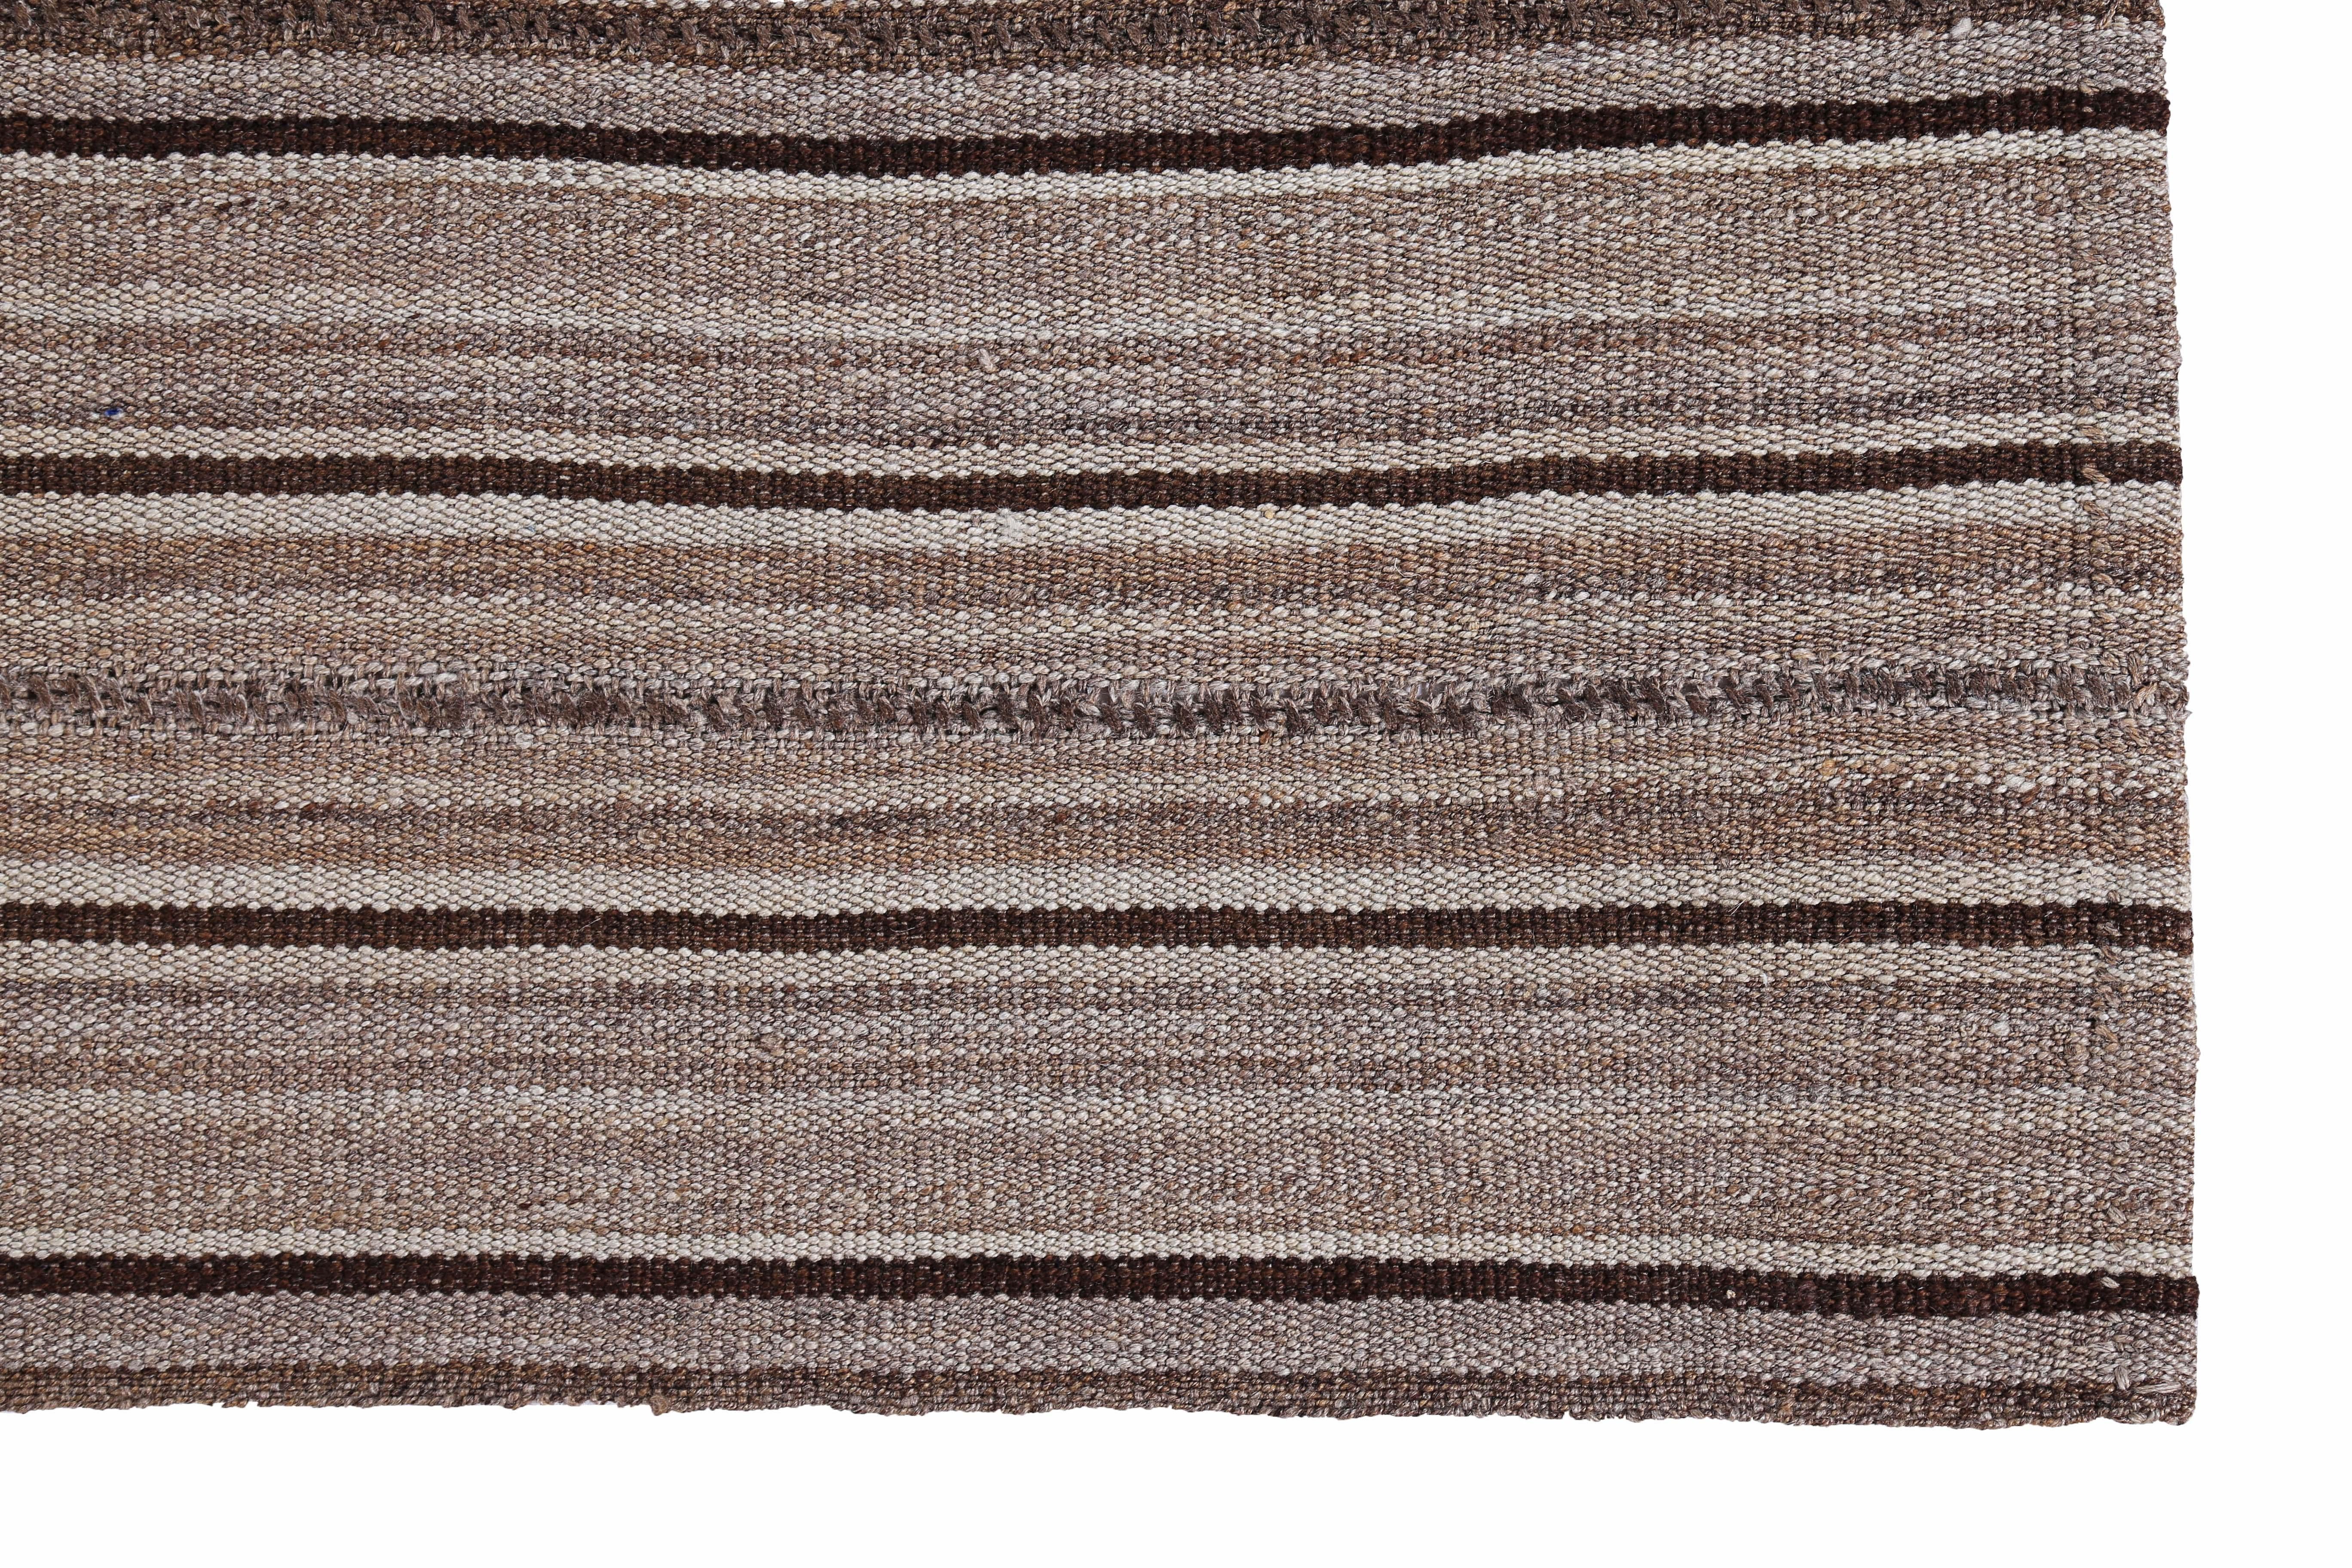 Hand-Woven Modern Turkish Kilim Rug with Brown and Beige Pencil Stripes For Sale